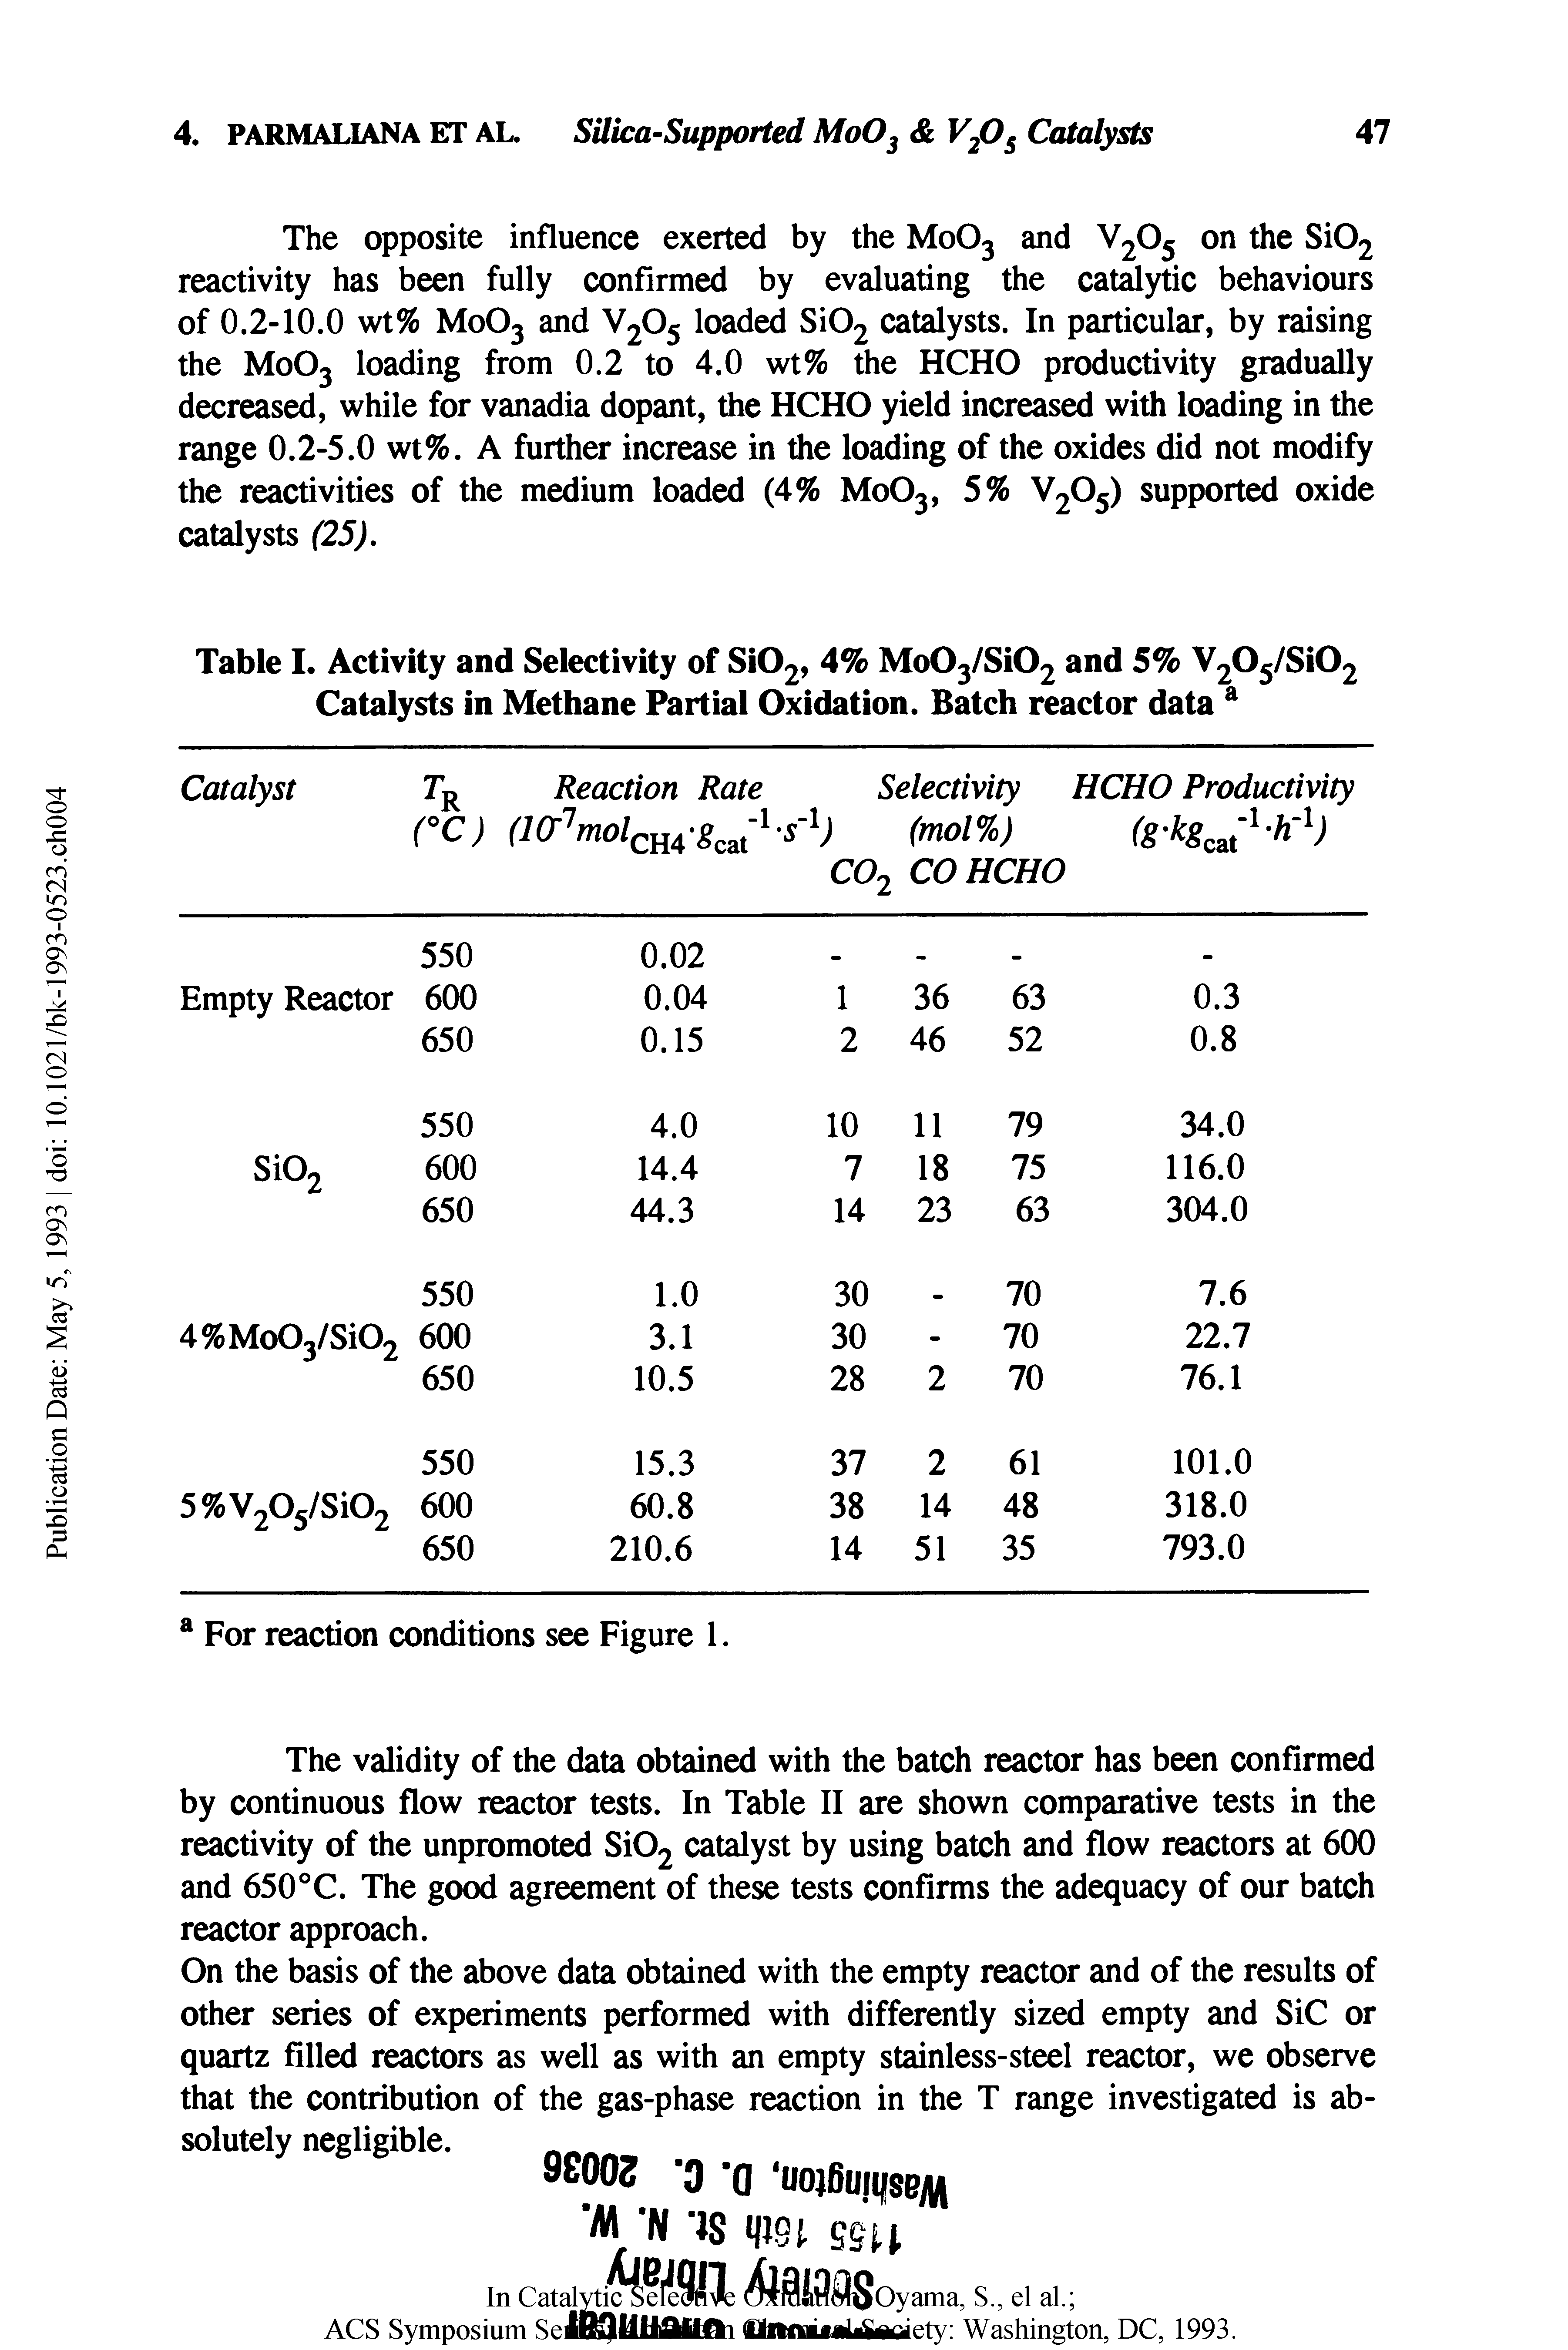 Table Activity and Selectivity of Si02, 4% Mo03/Si02 and 5% 203/8102 Catalysts in Methane Partial Oxidation. Batch reactor data ...